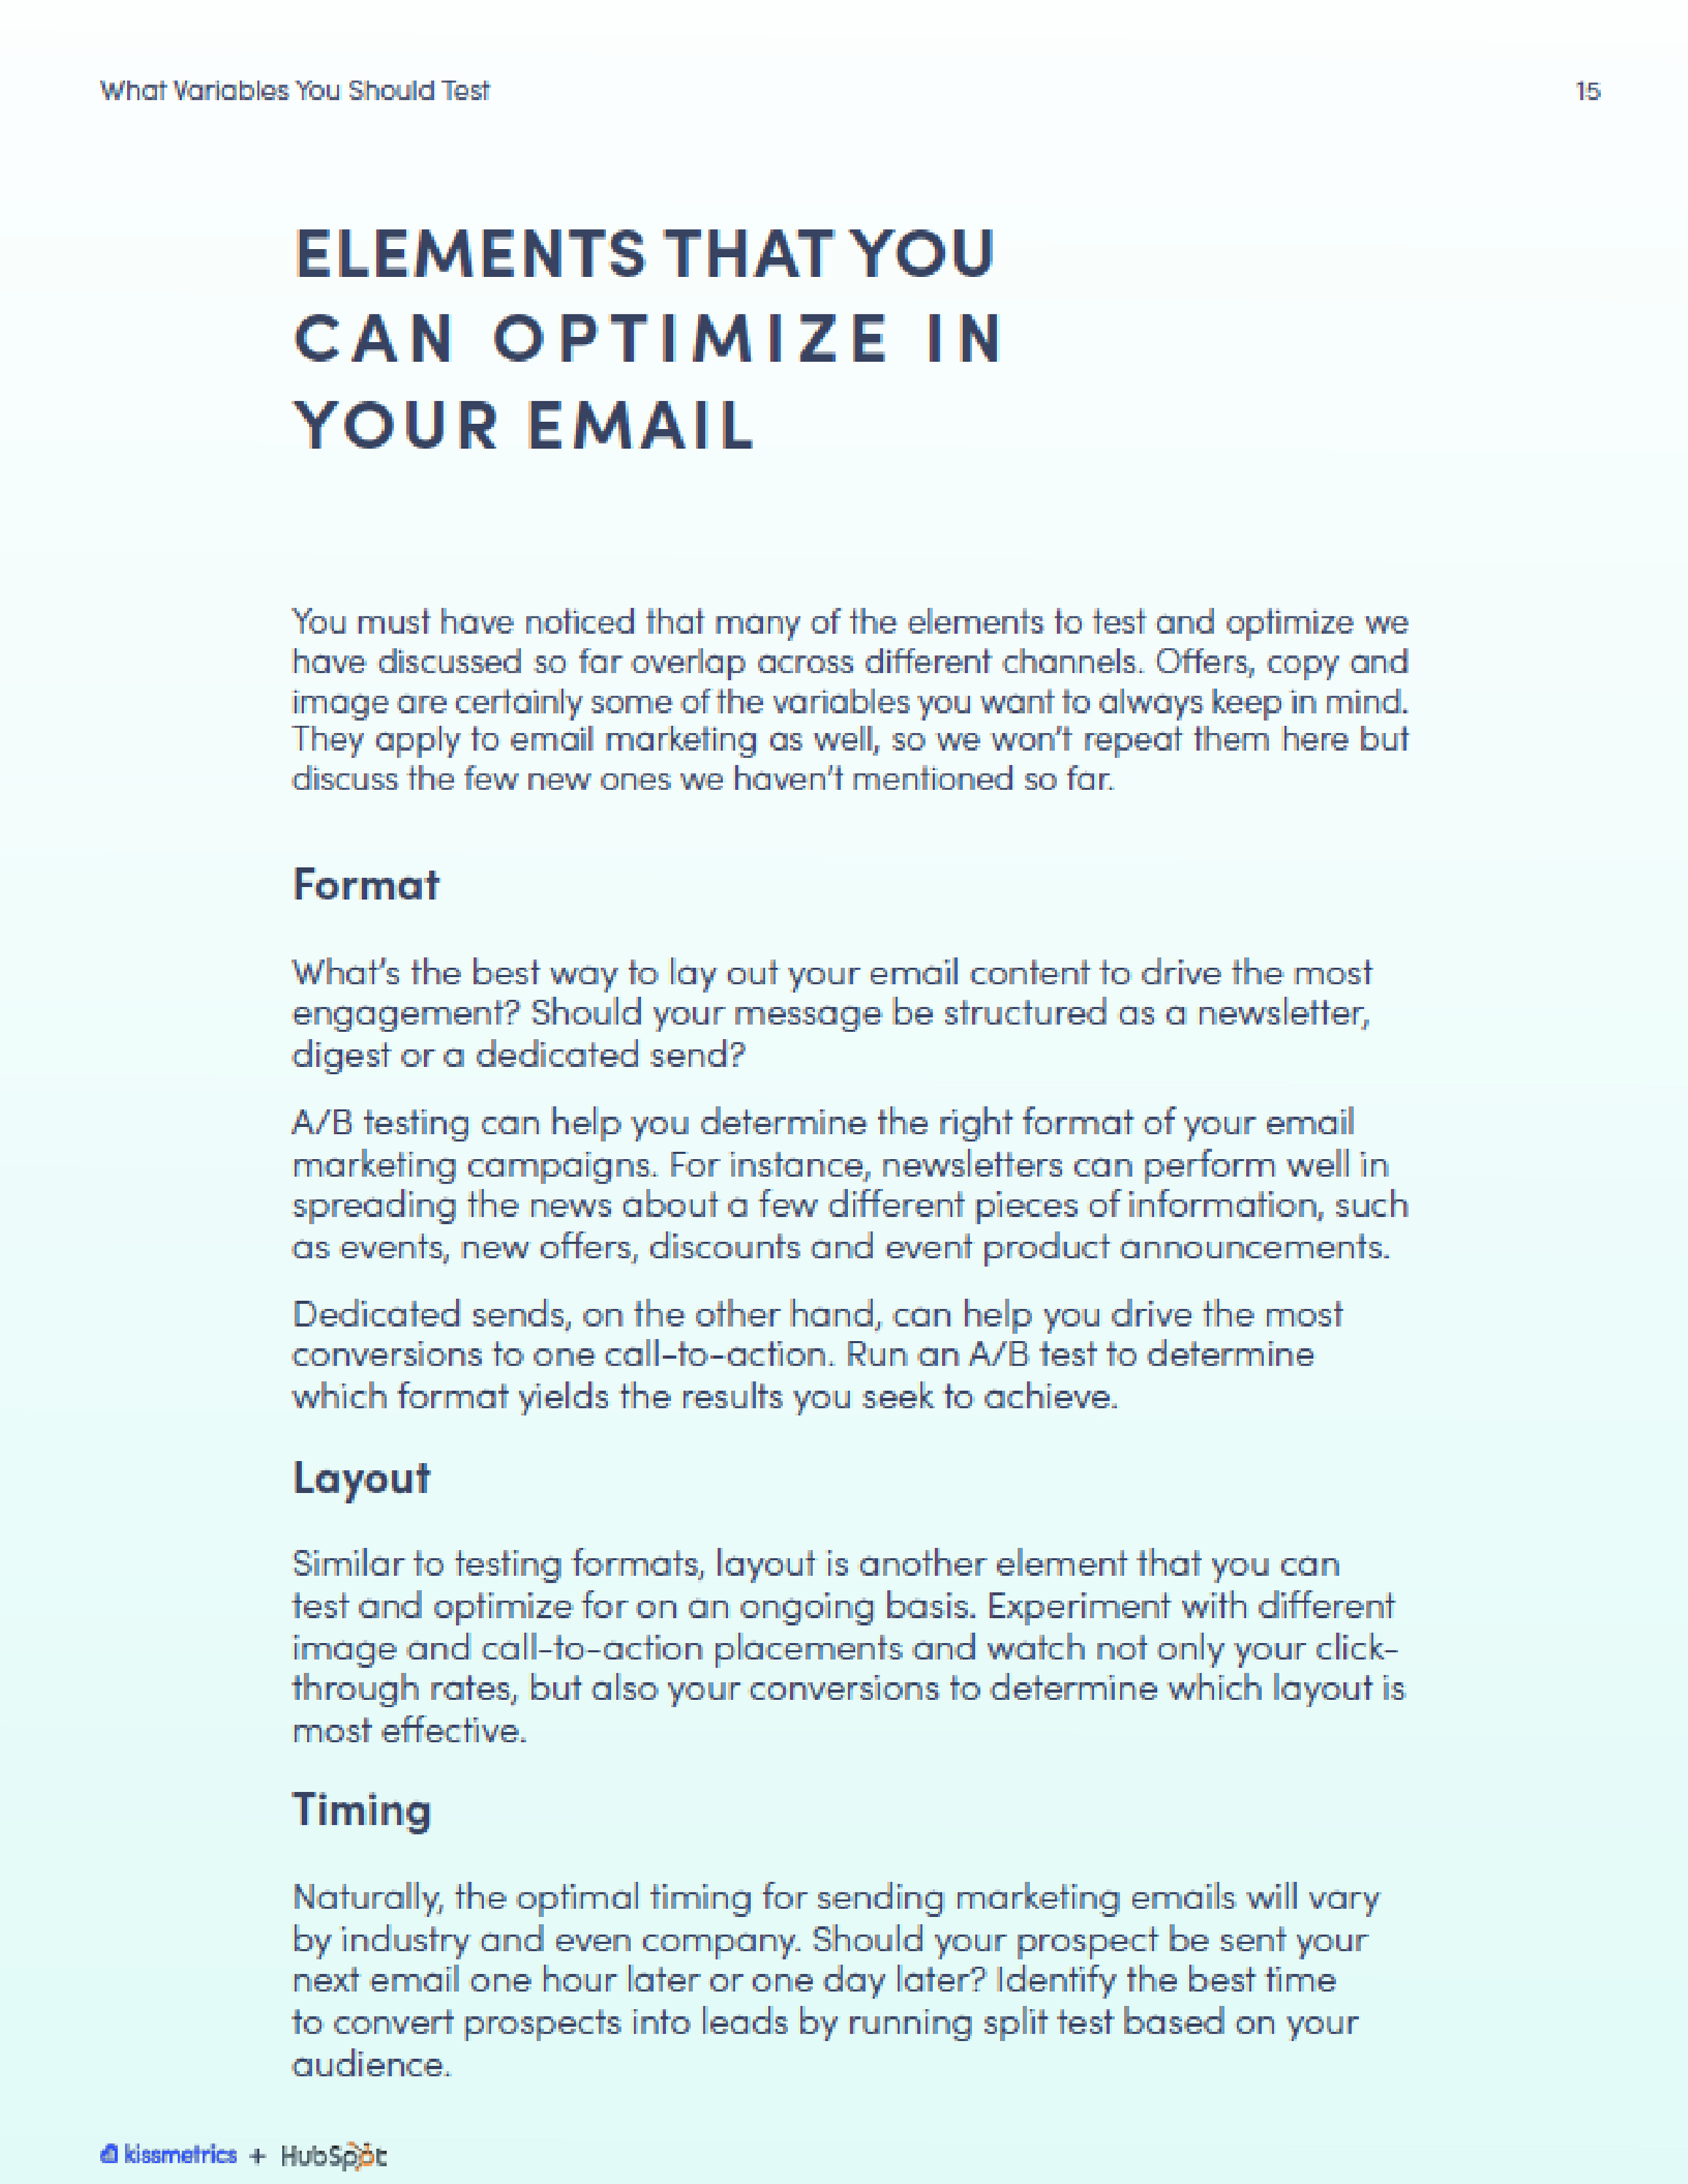 Elements you can optimize in your email